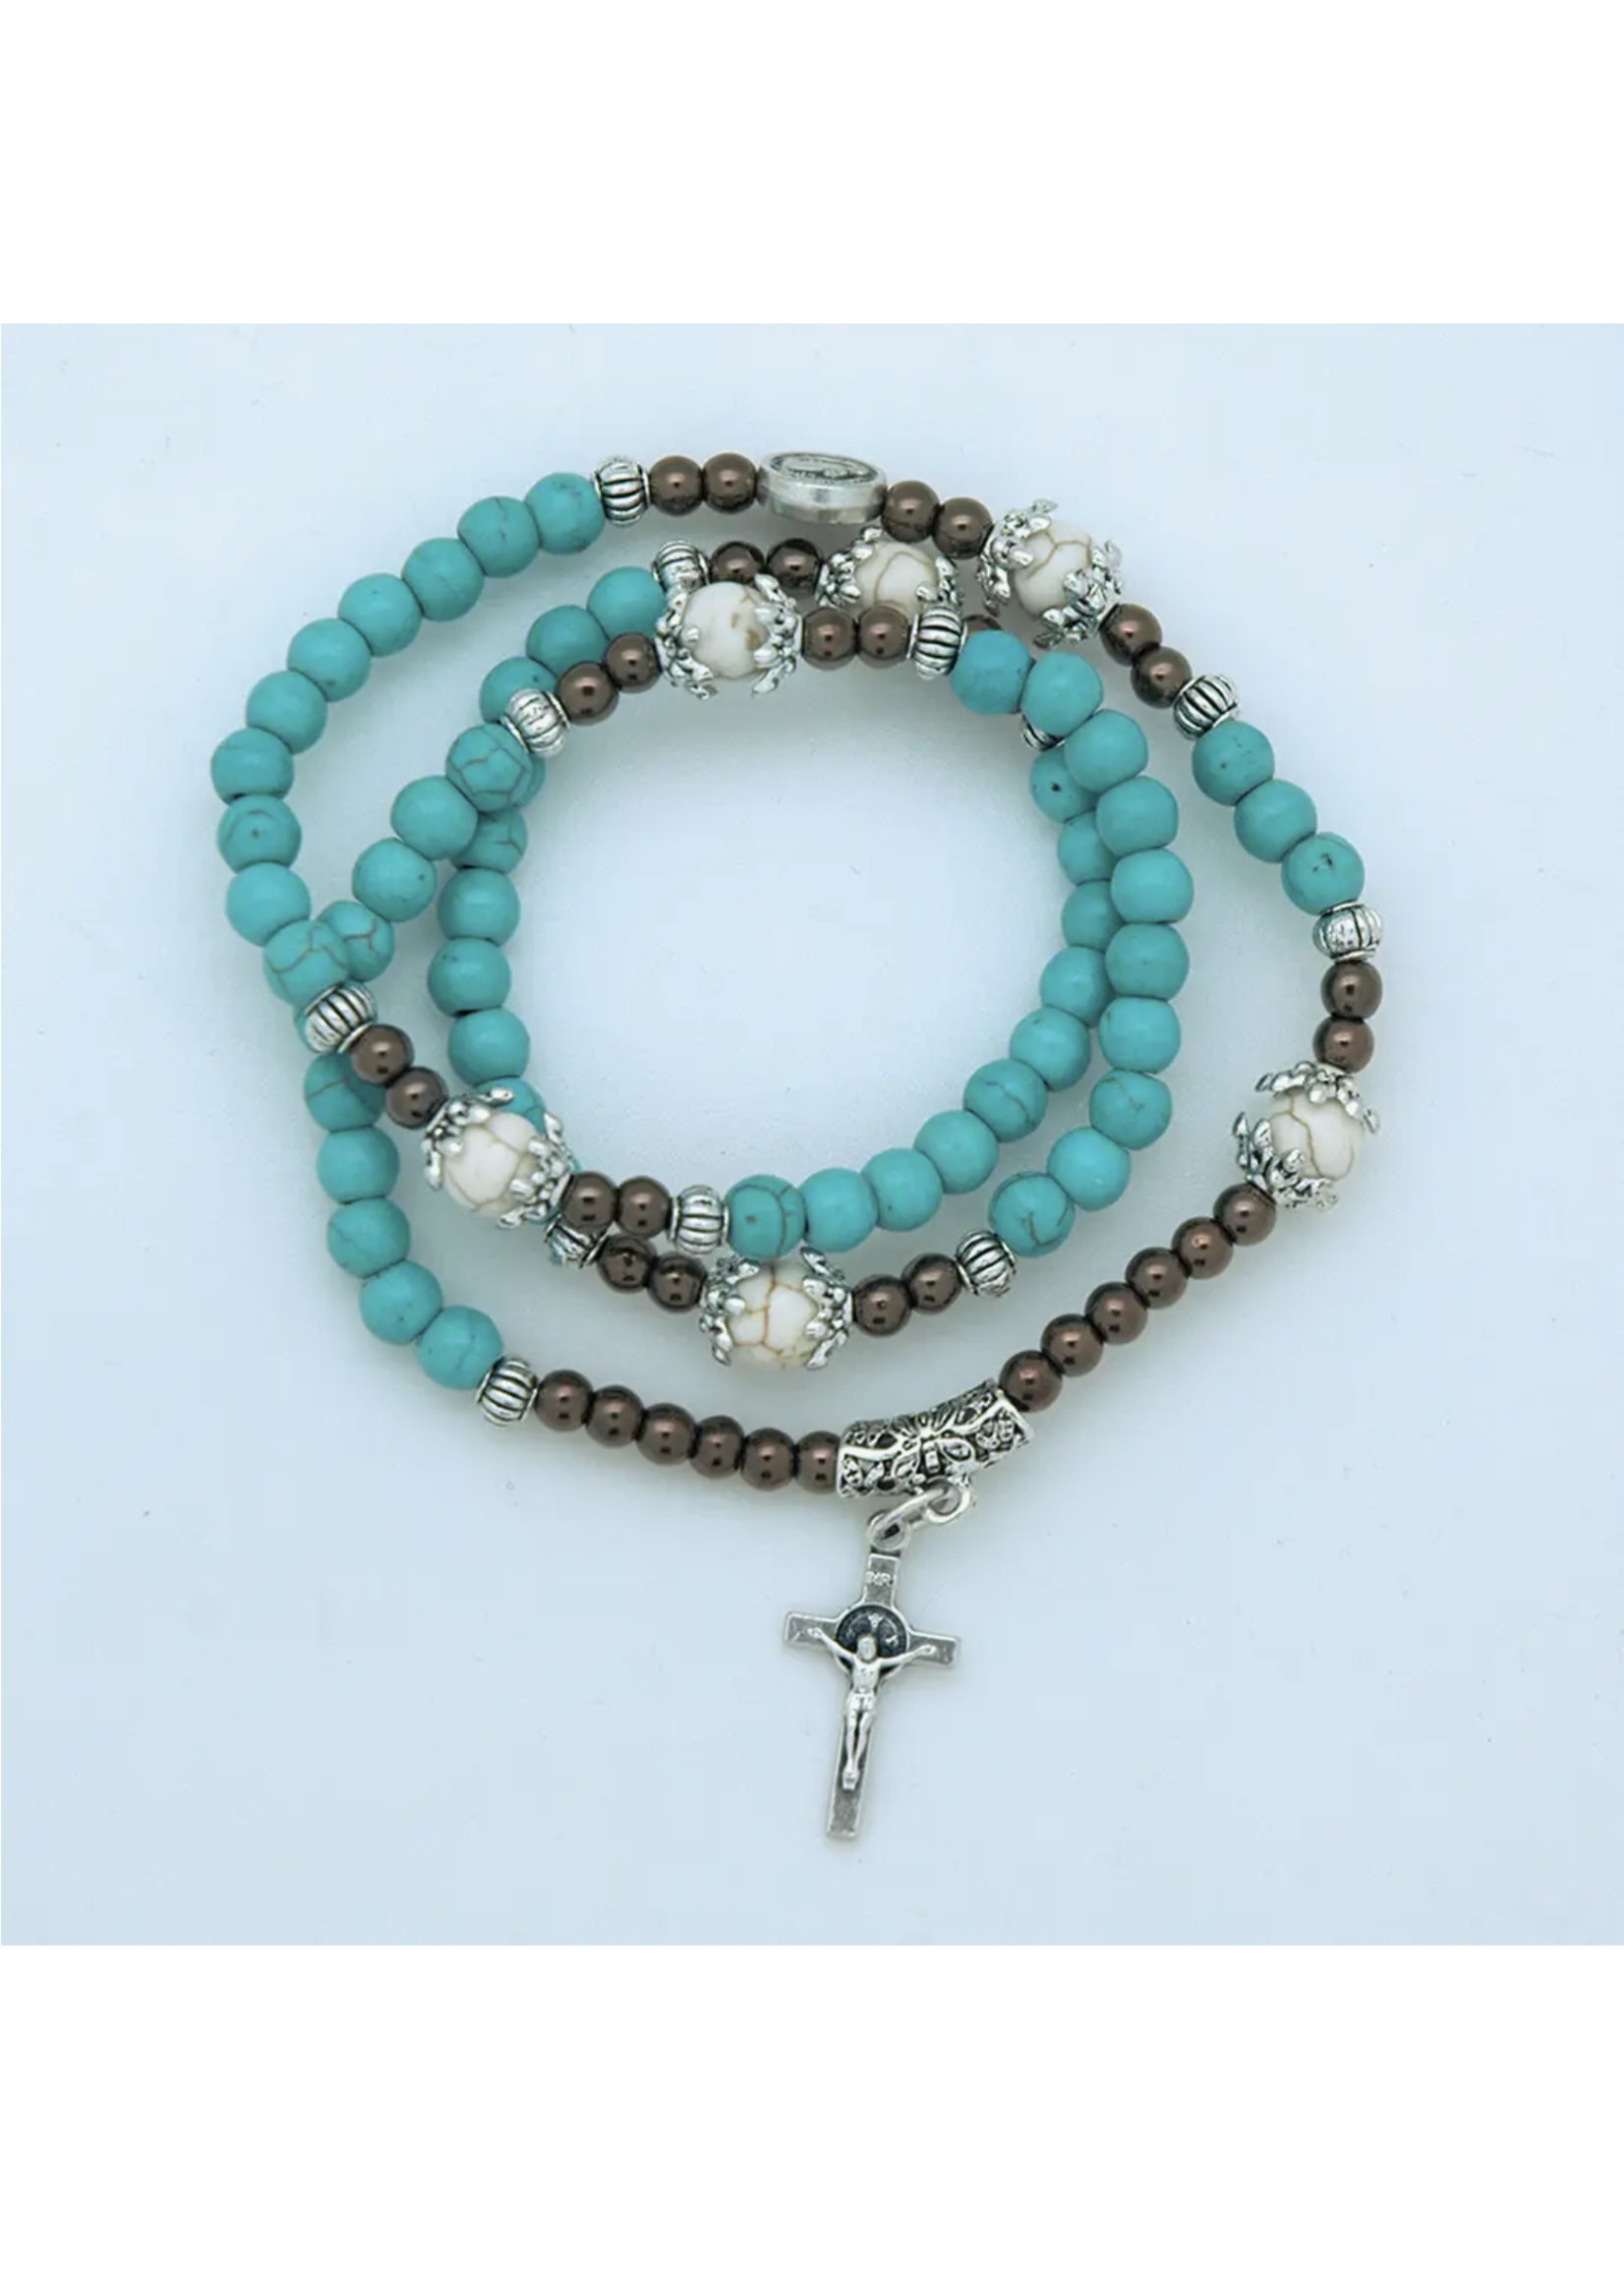 Turquoise Rosary Wrap Bracelet from Fatima with St Benedict Medals